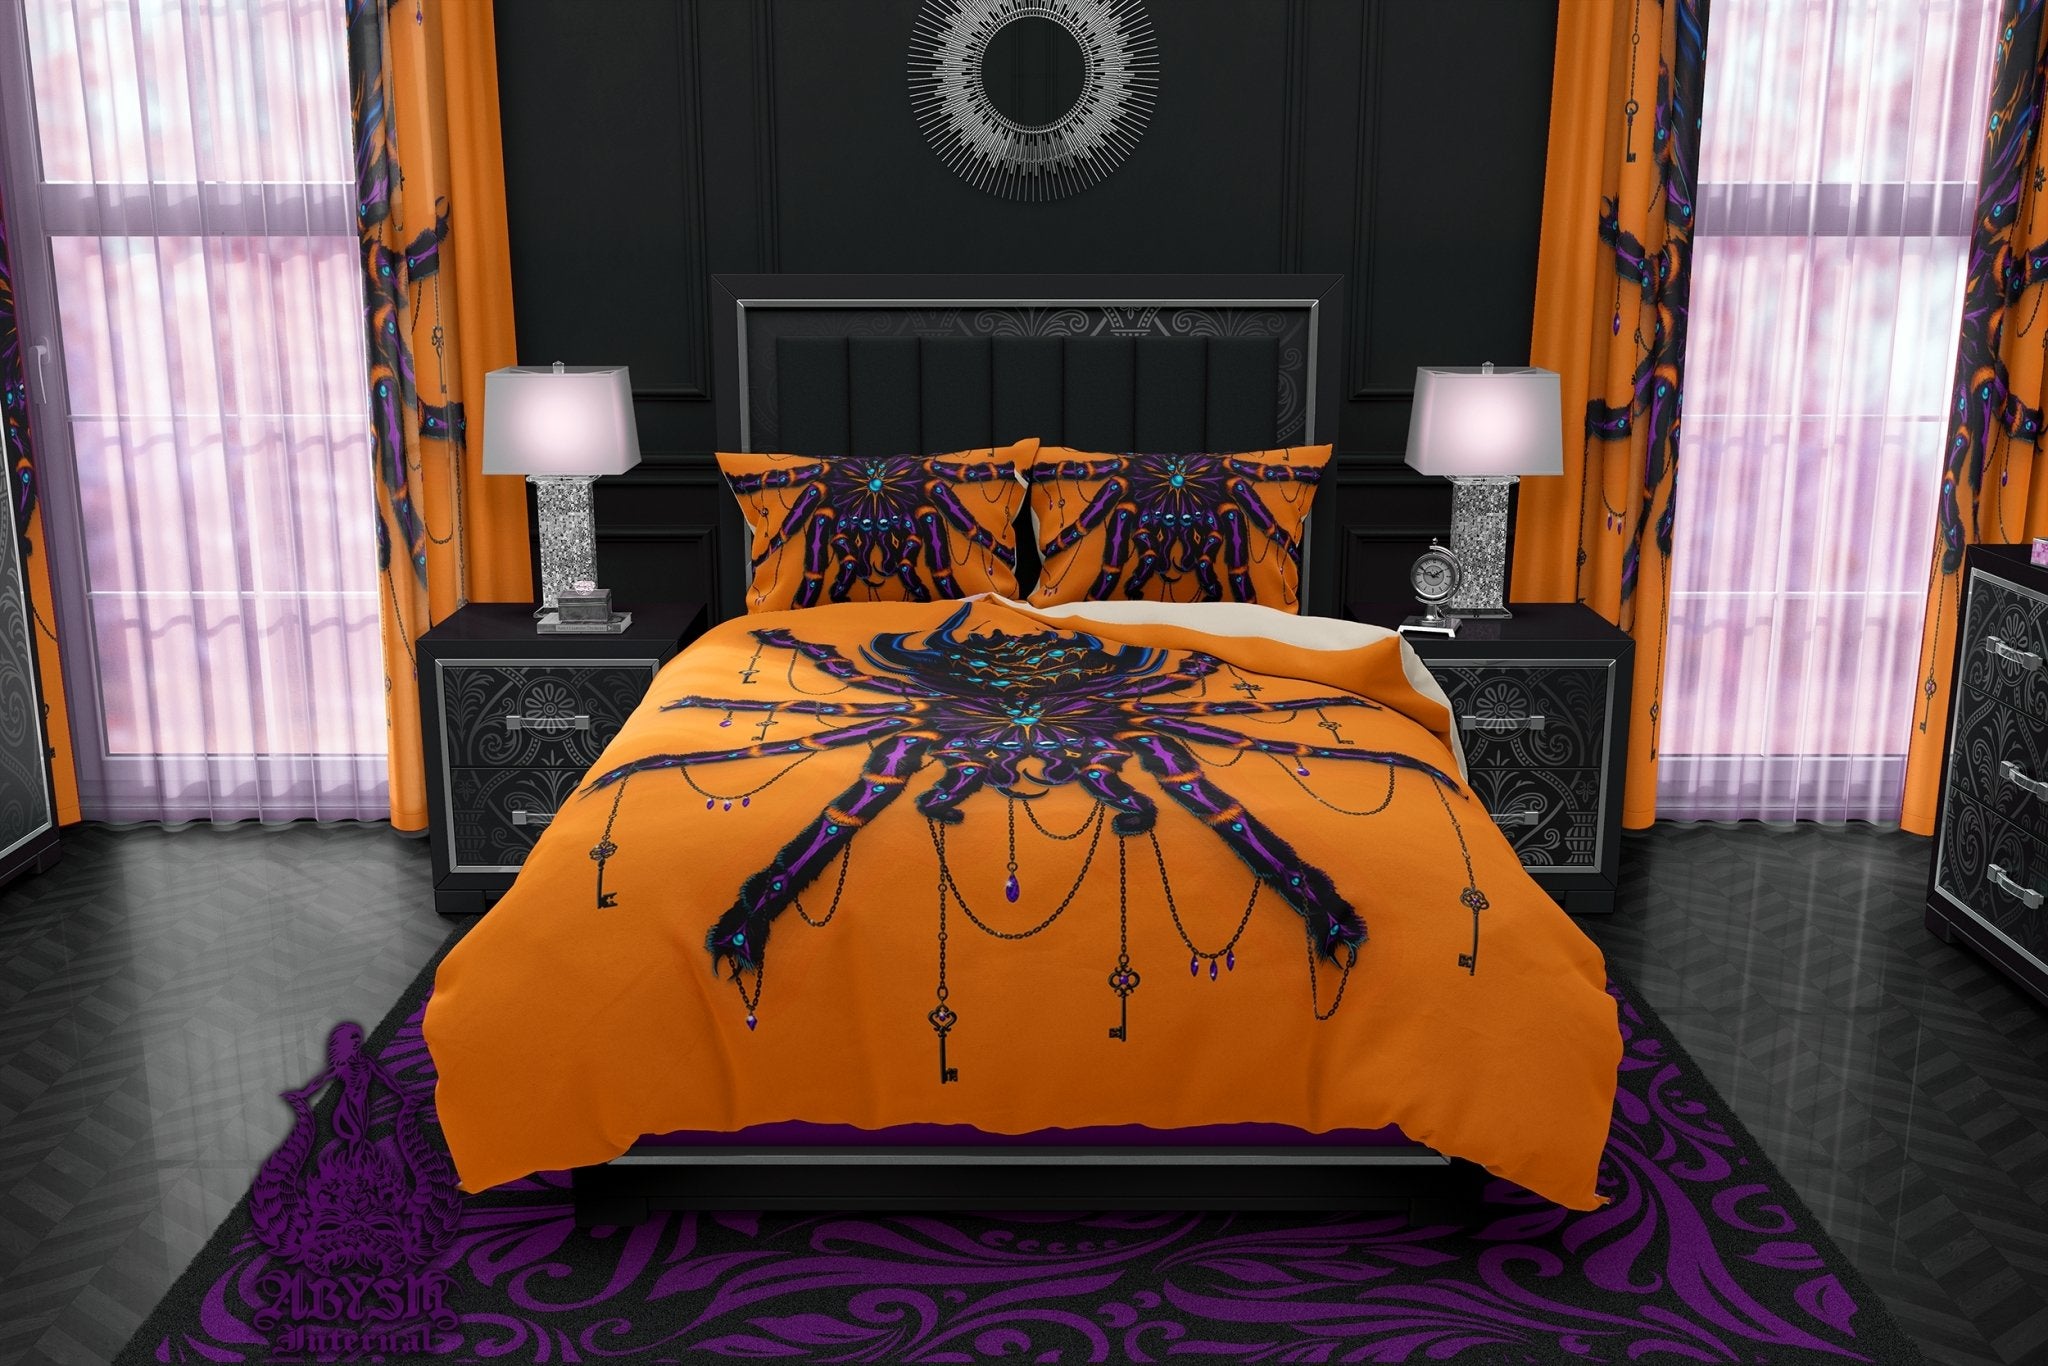 Spider Bedding Set, Comforter and Duvet, Bed Cover and Bedroom Decor, King, Queen and Twin Size - Tarantula Neon Goth - Abysm Internal